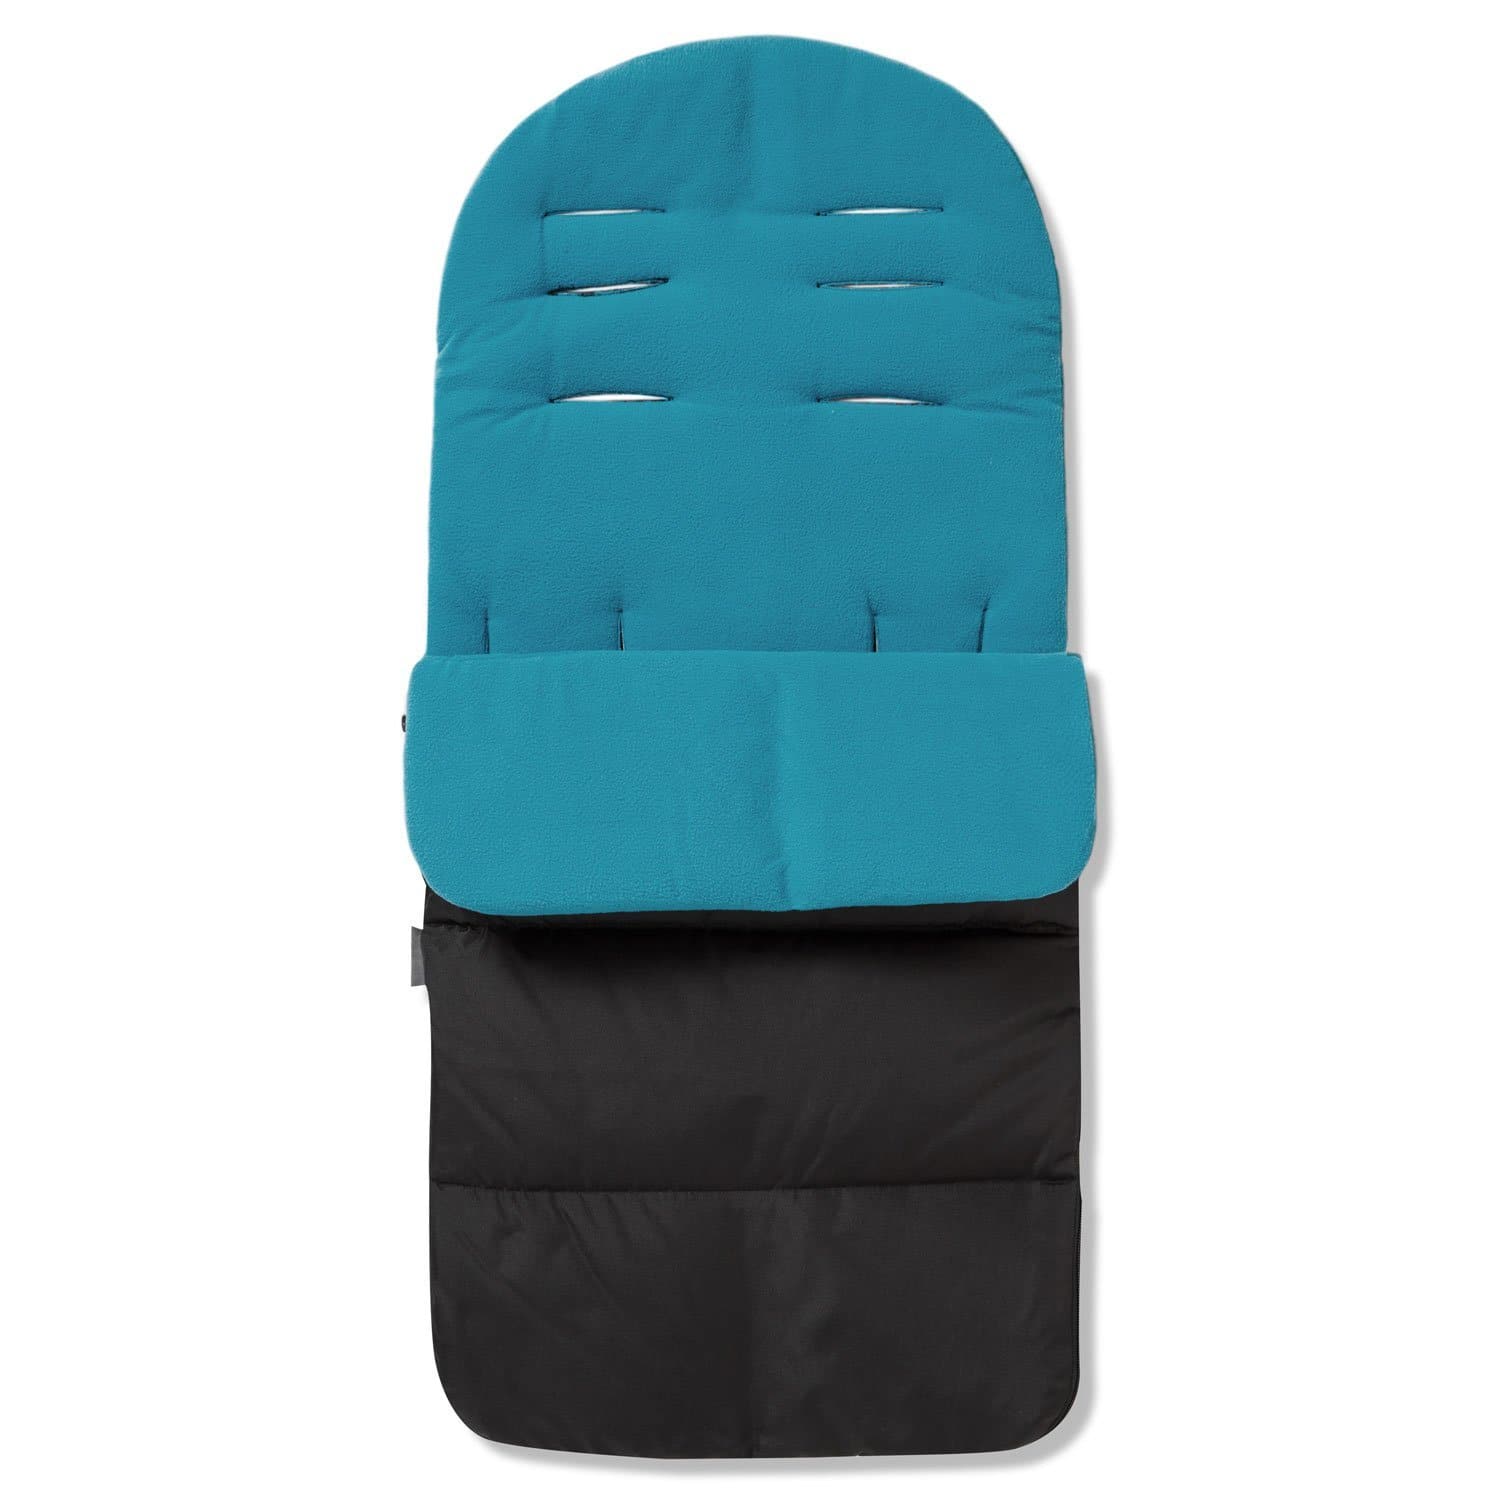 Premium Footmuff / Cosy Toes Compatible with Joie - Ocean Blue / Fits All Models | For Your Little One